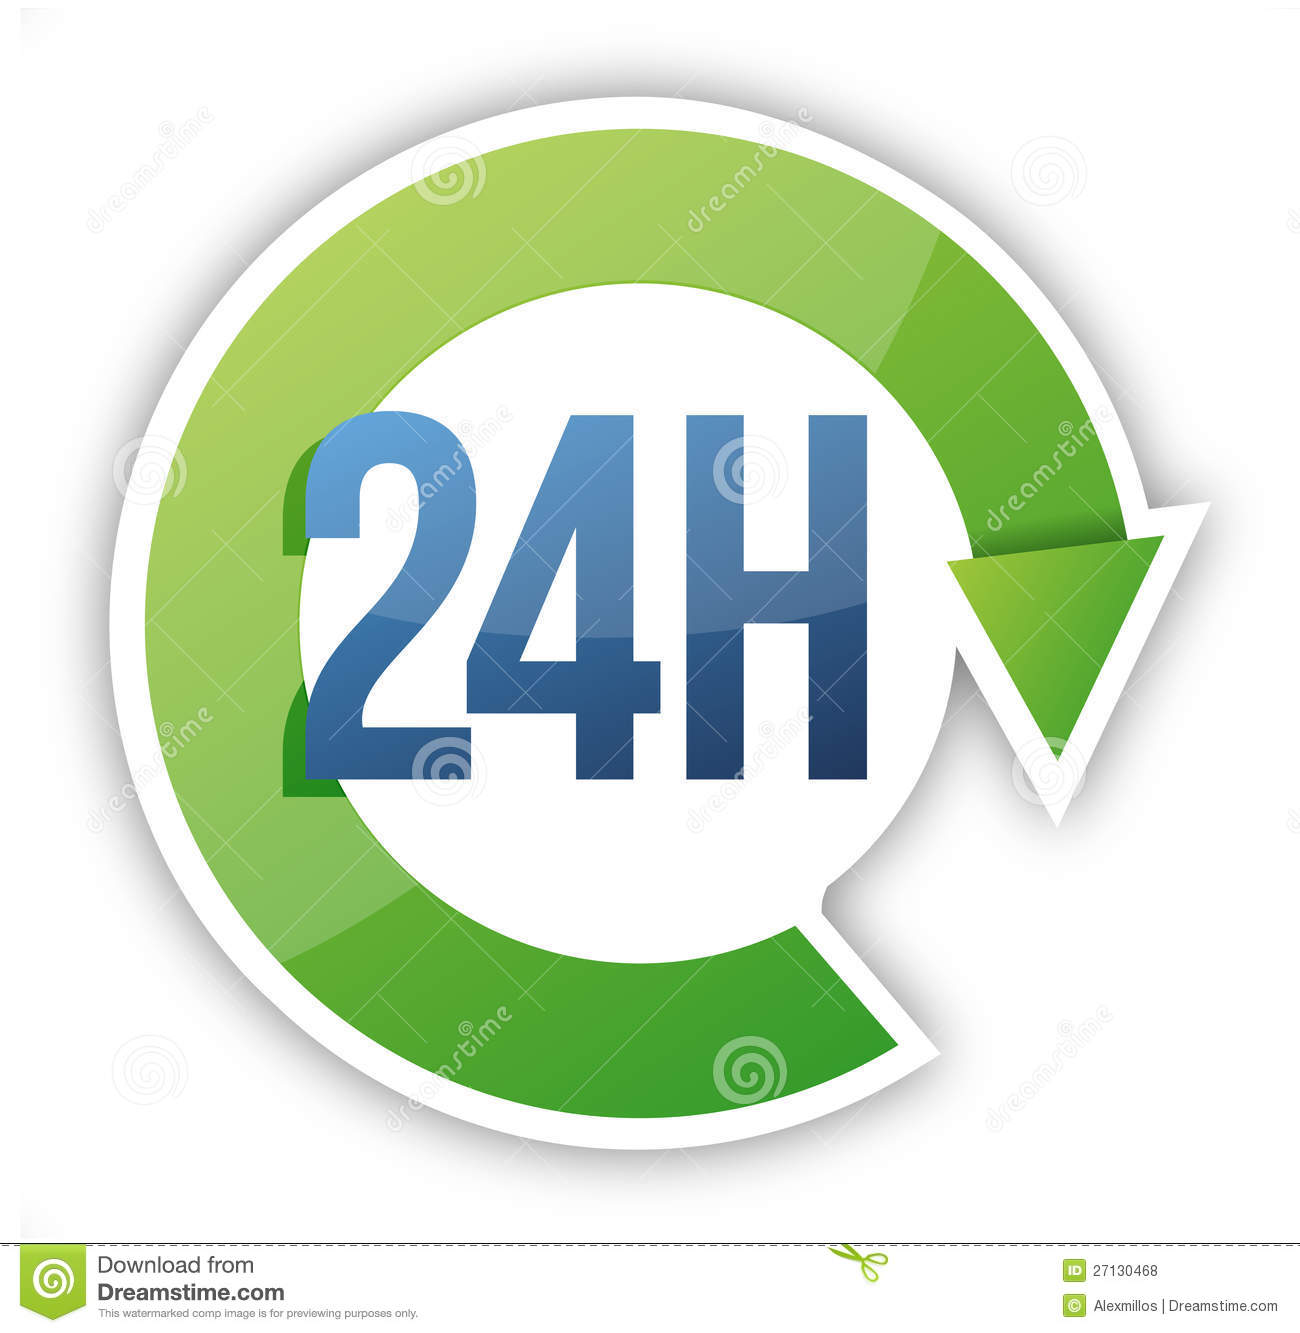 Cycle 24 Hour Service Illustration Design Royalty Free Stock Photos